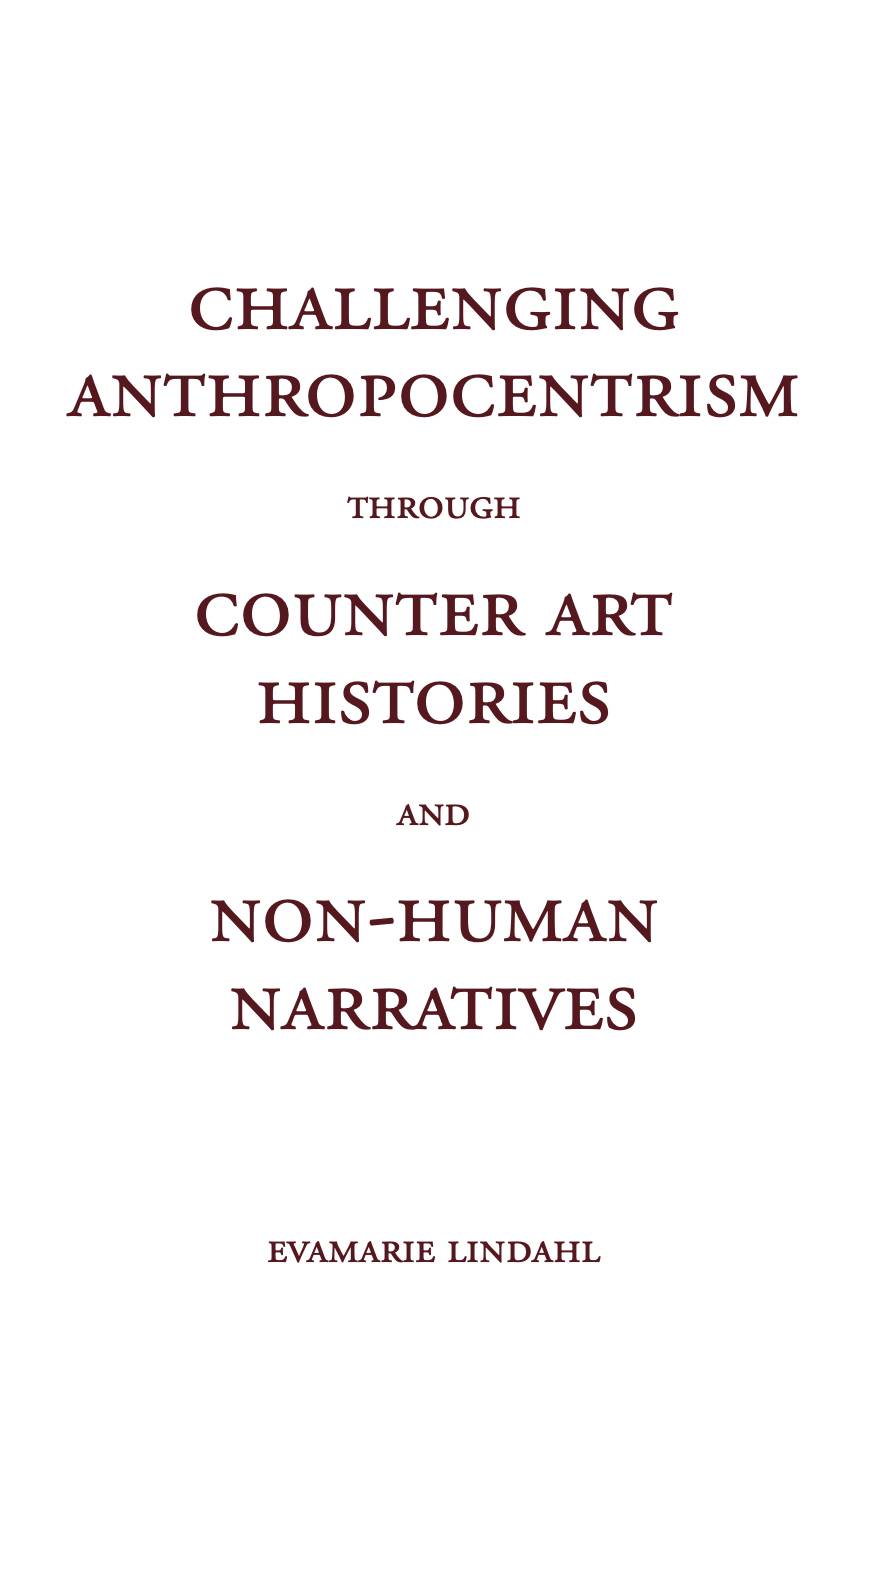 Challenging Anthropocentrism through Counter Art Histories and Non-Human Narratives